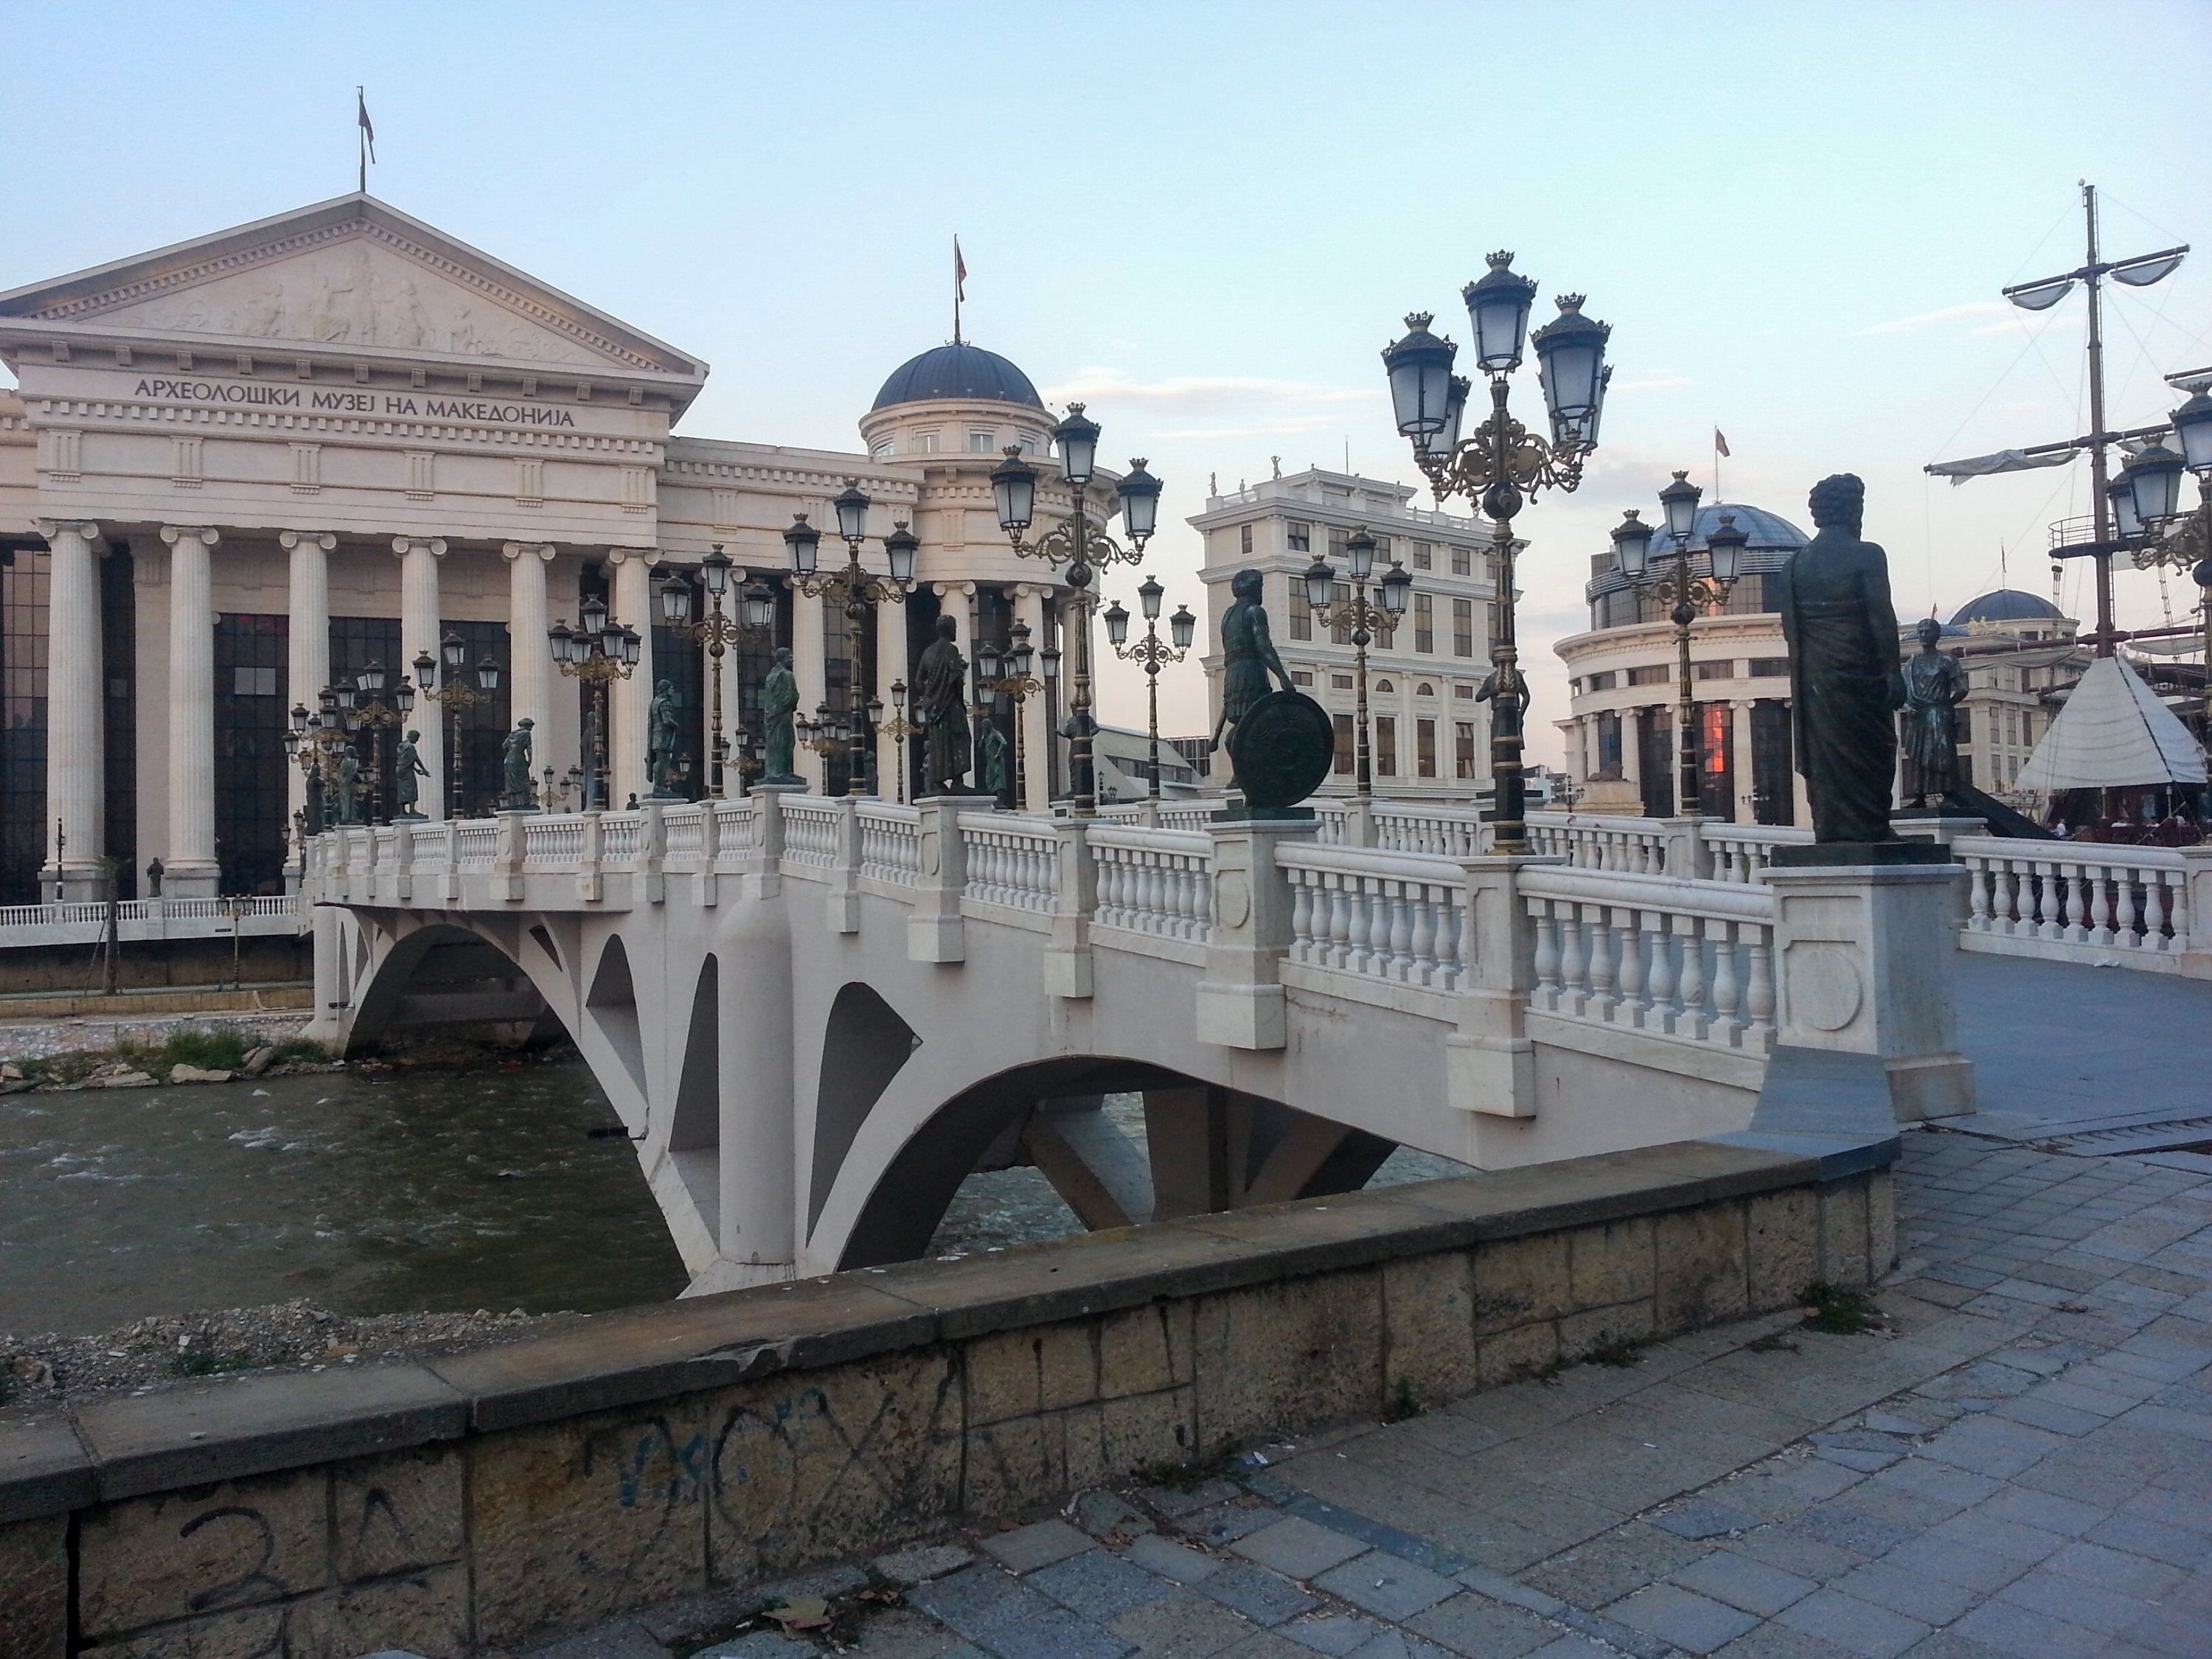 The Archaeological Museum and the Freedom Bridge in Skopje, North Macedonia.  (Photo by Özge Şengelen)